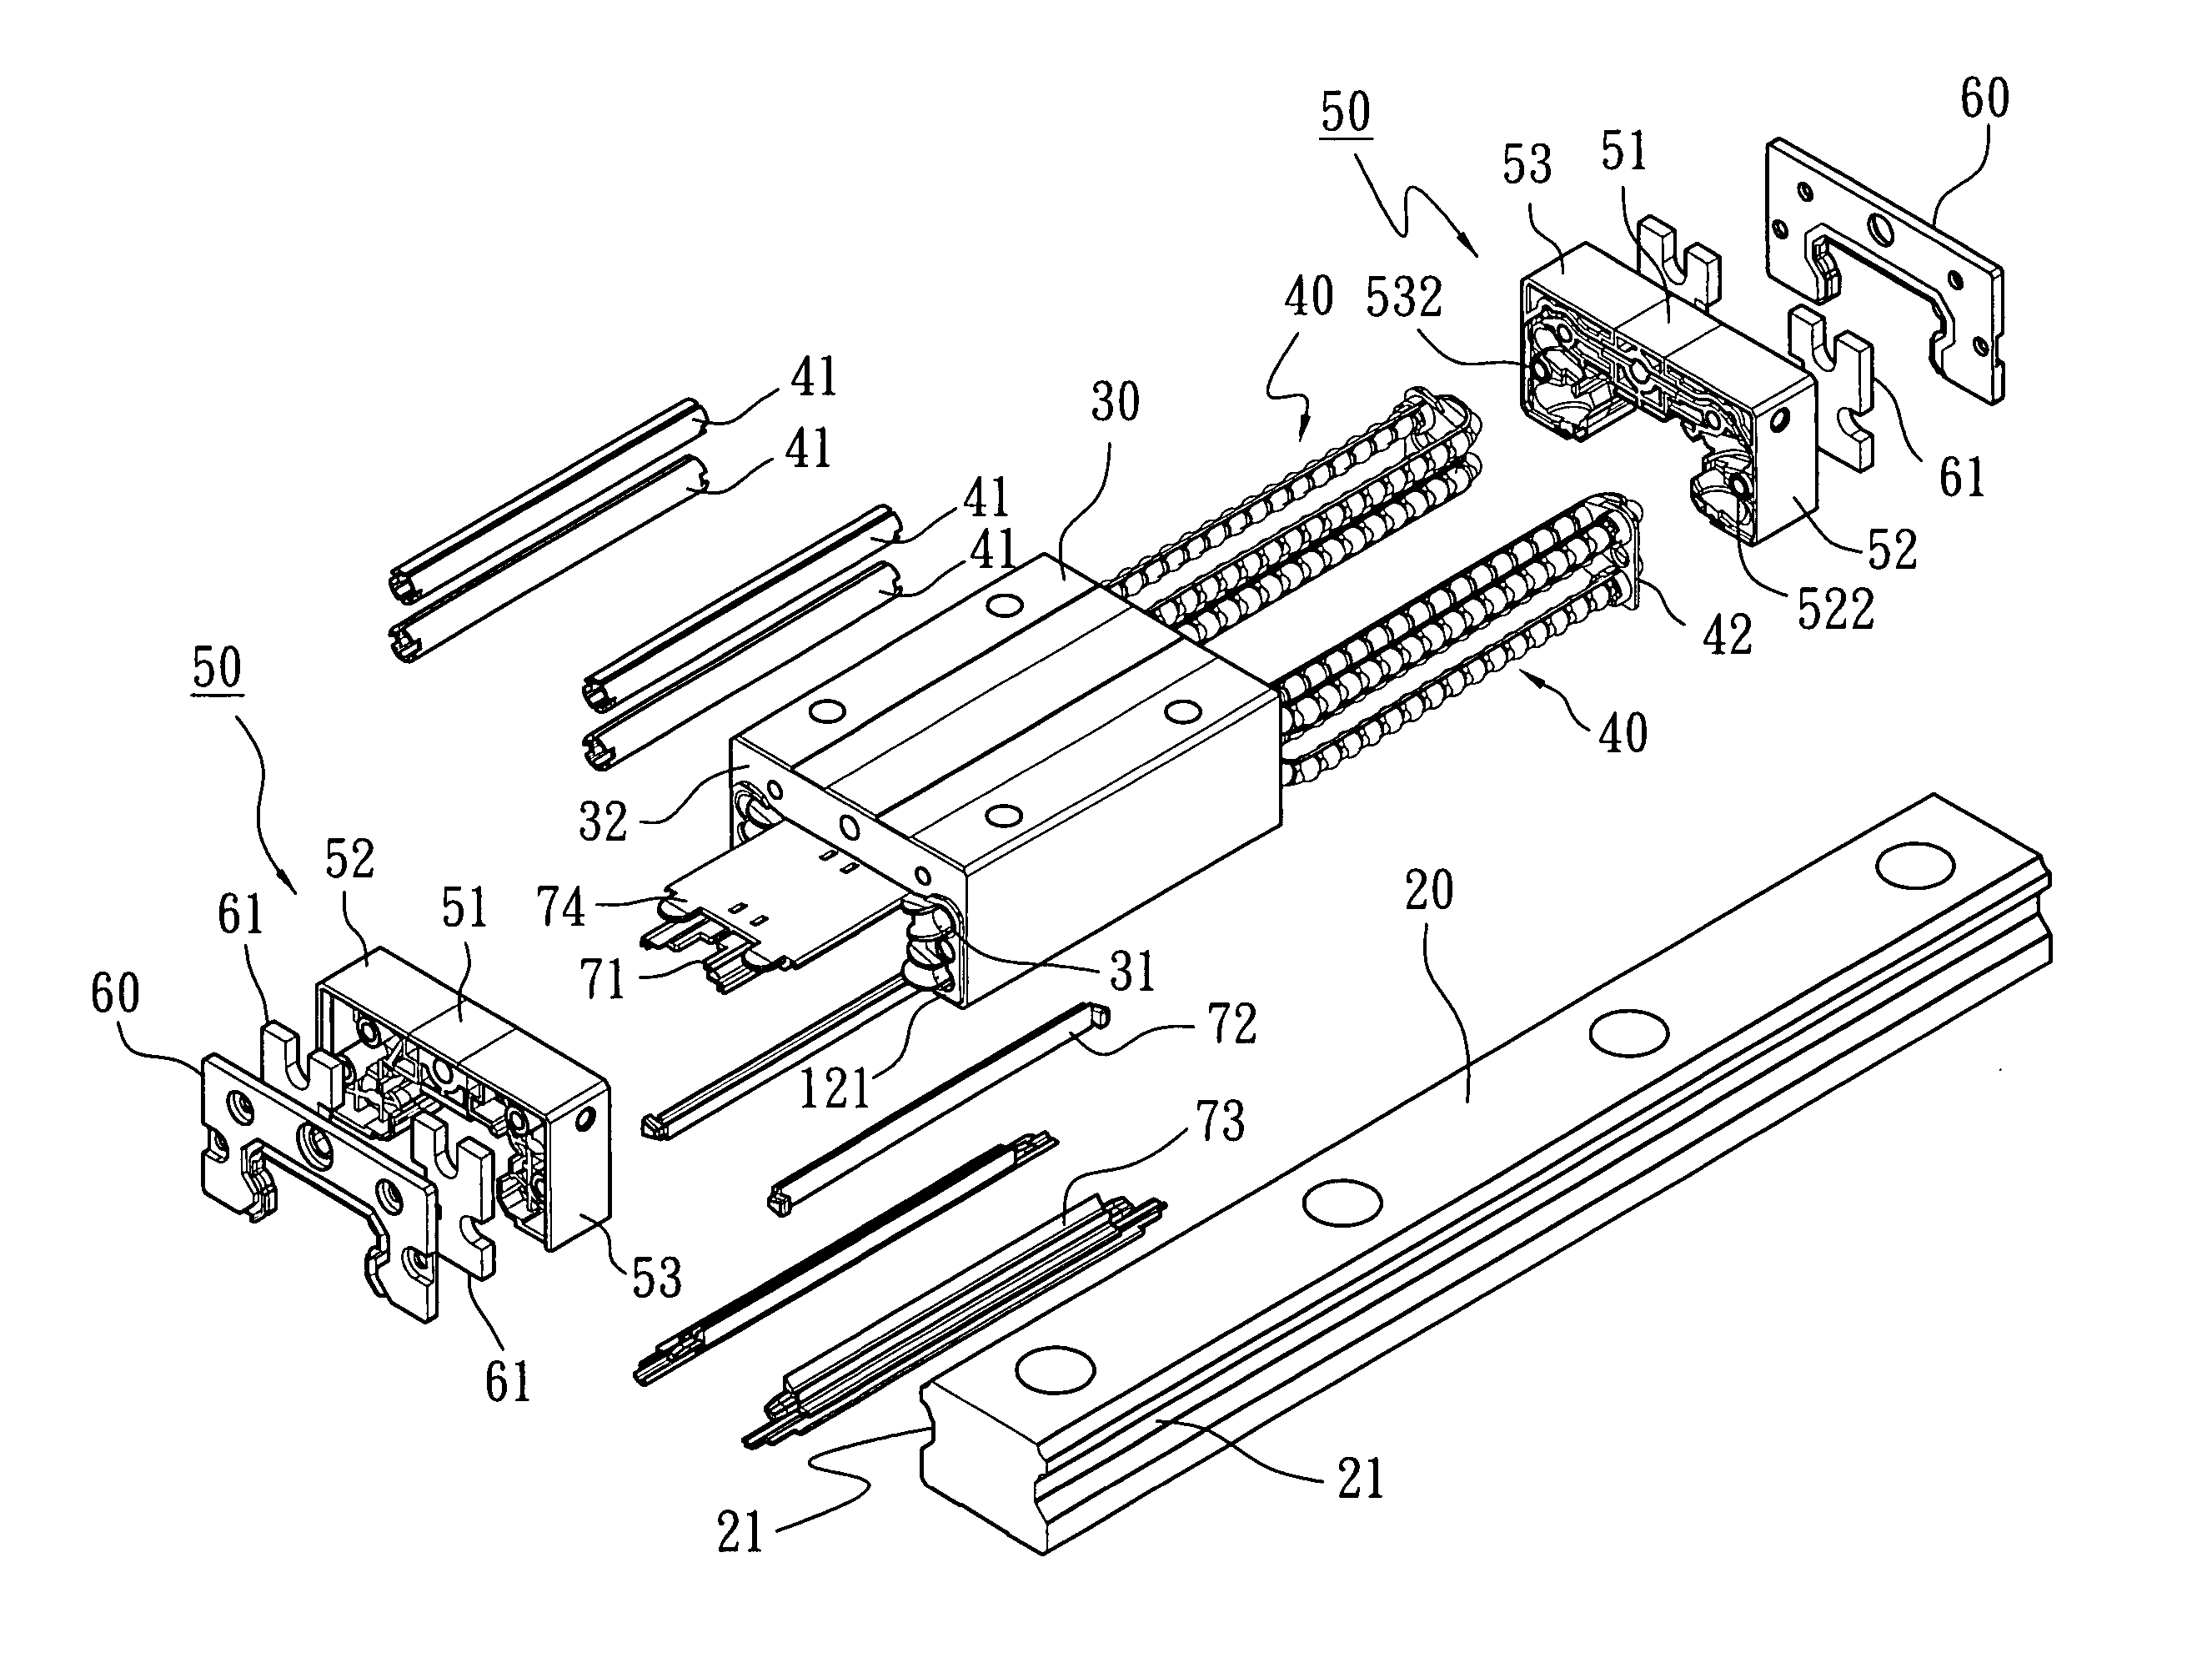 Structure of linear sliding rail circulating device